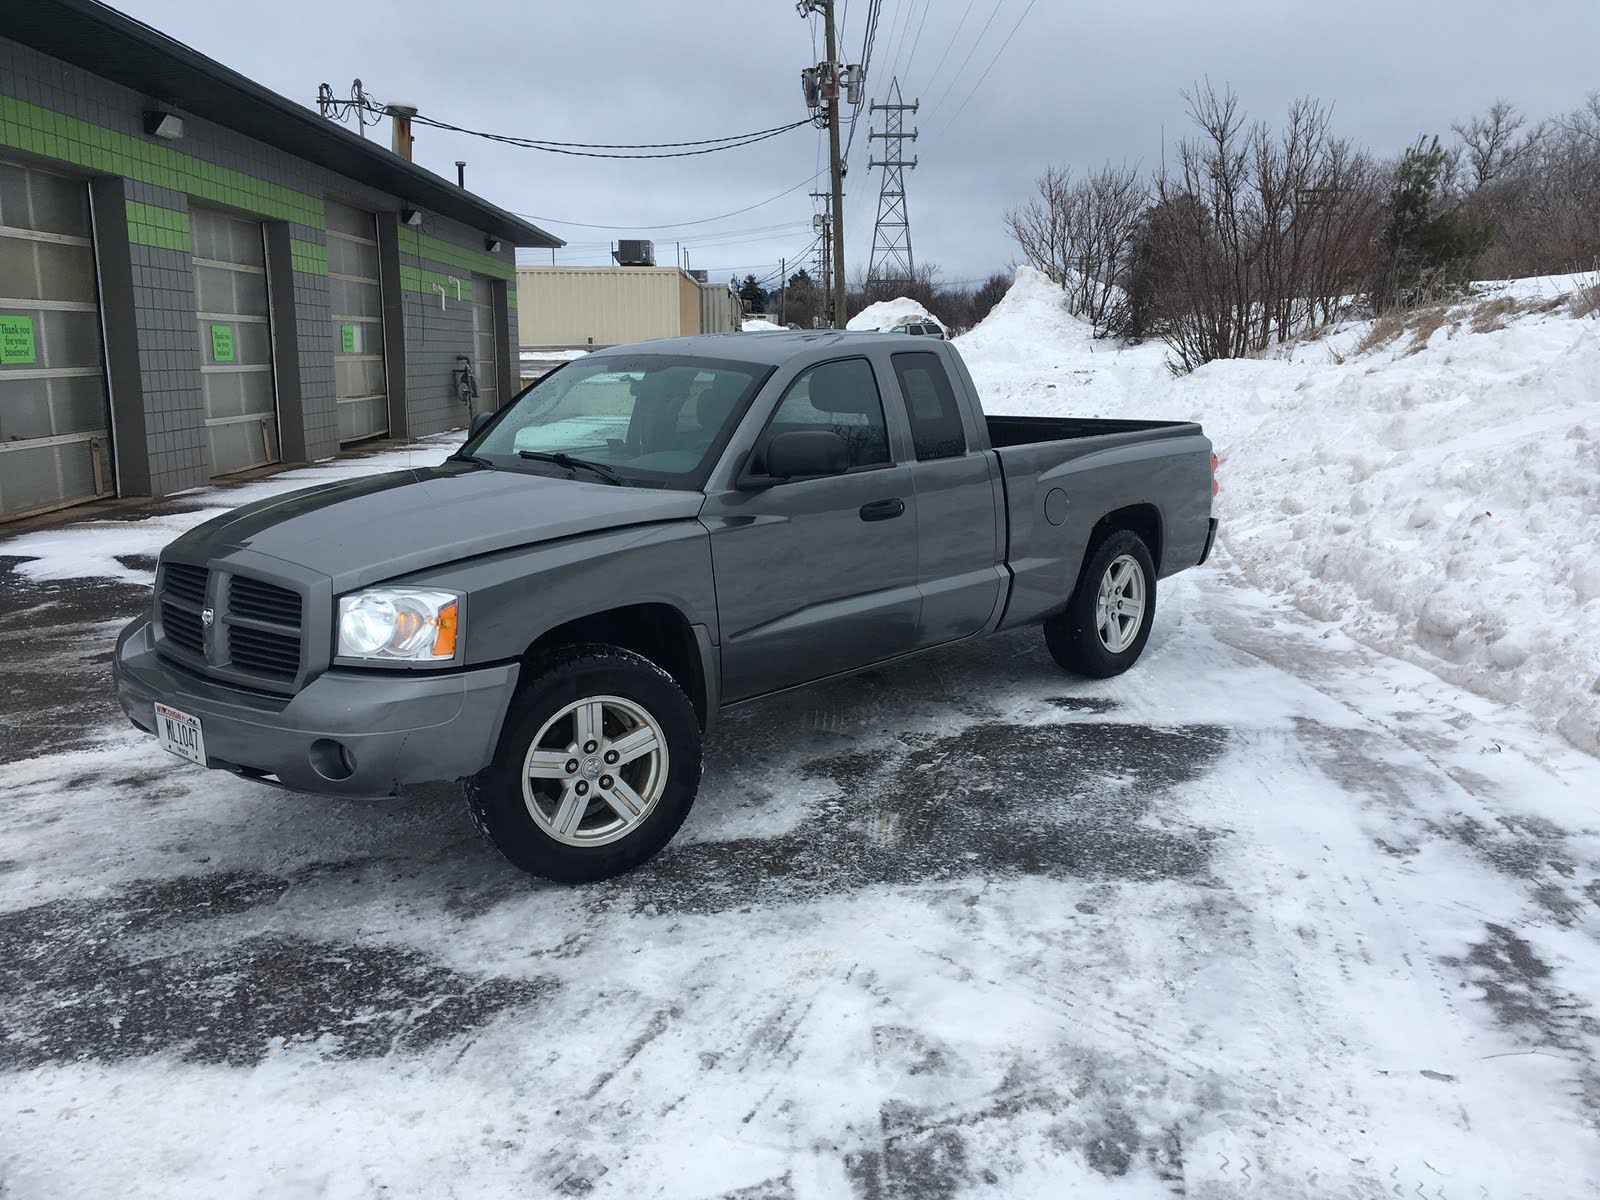 Dodge RAM 1500 Questions - why dont my tail lights works? - CarGurus 2005 Dodge Ram 1500 Tail Lights Not Working